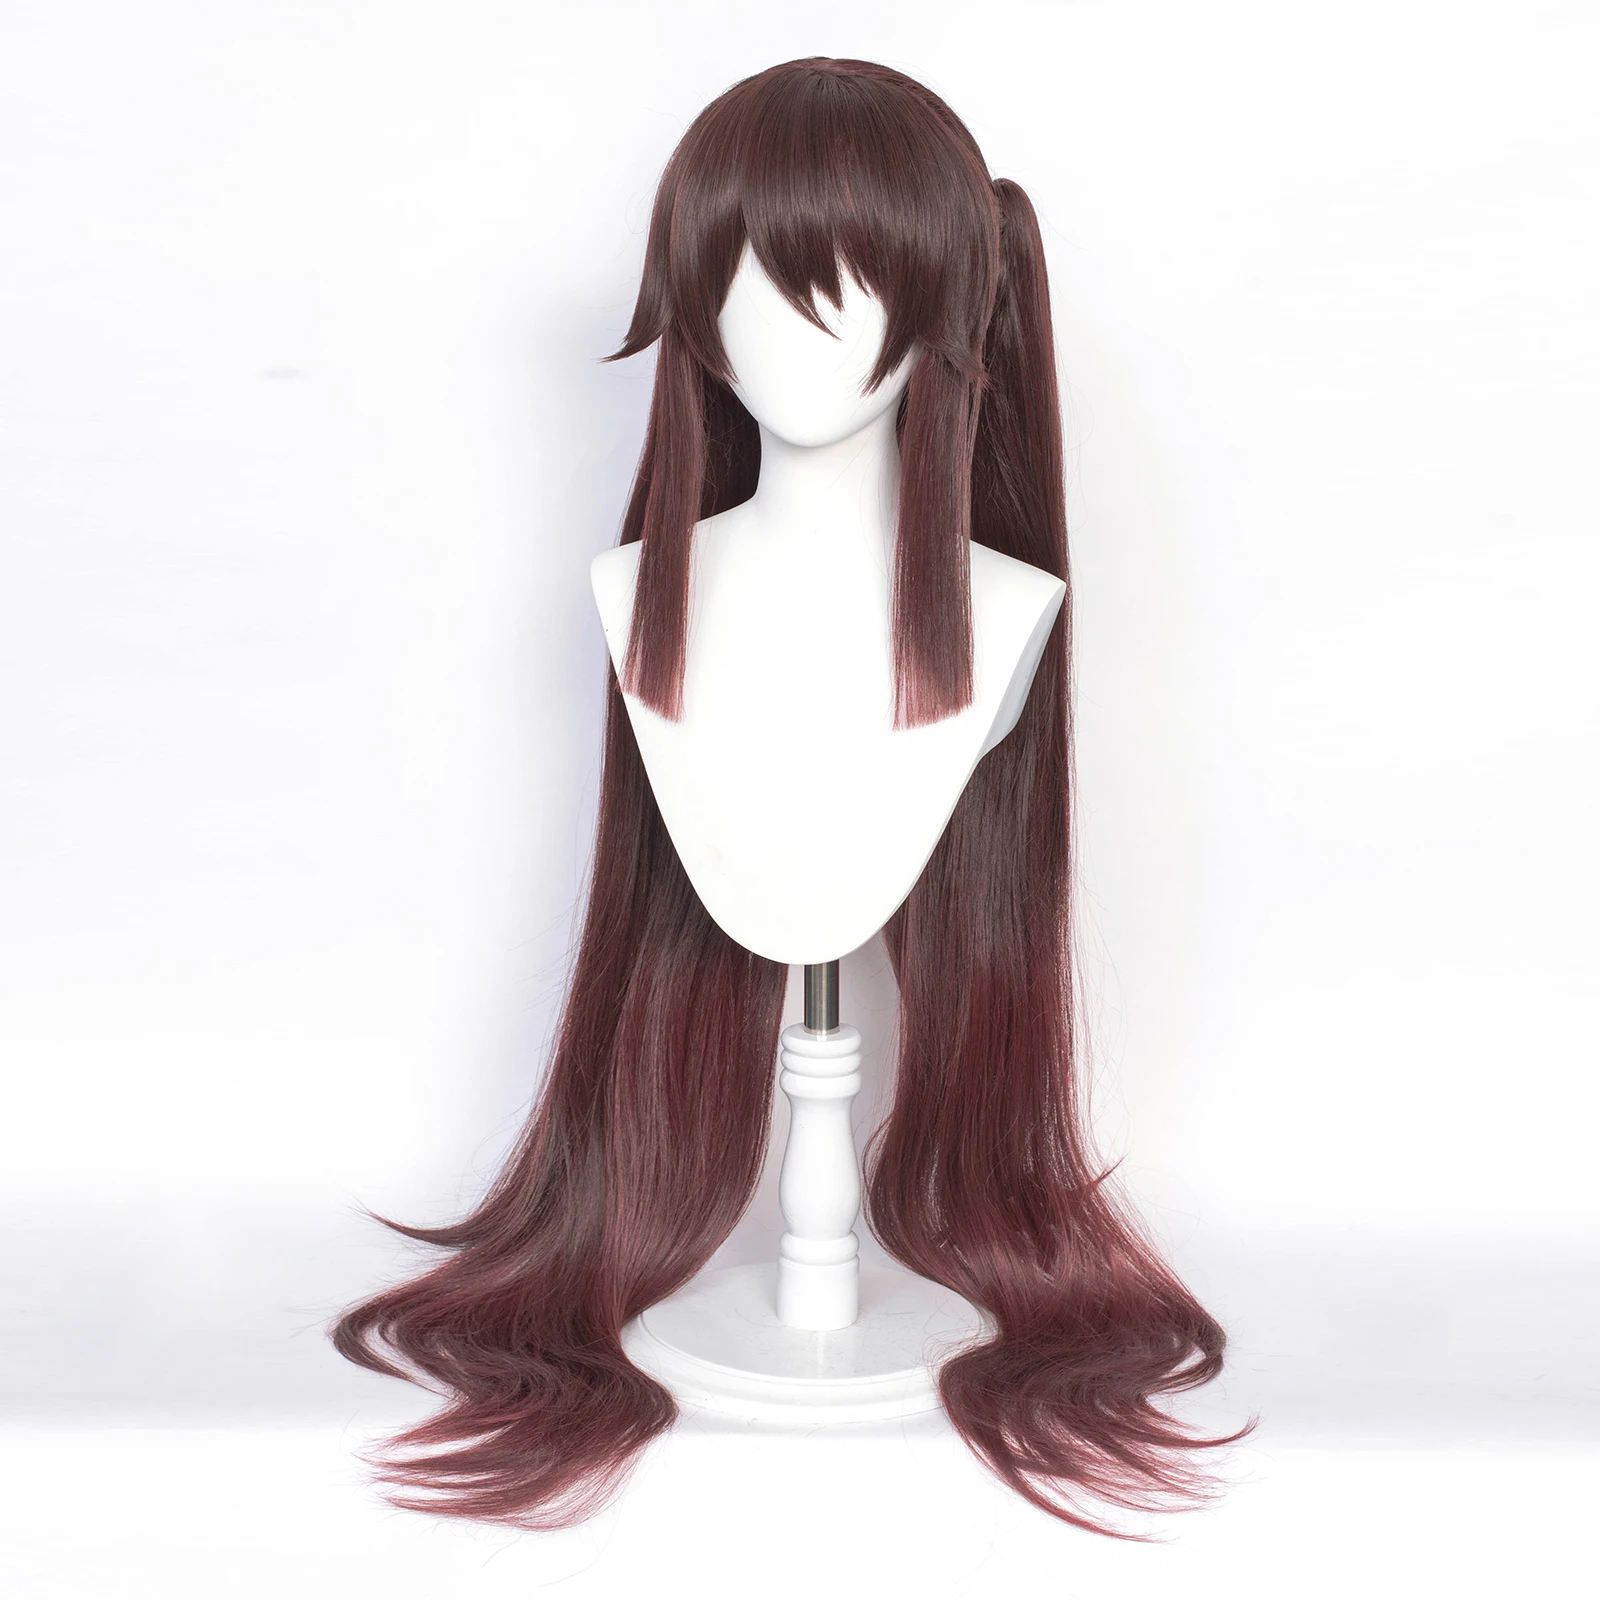 RANYU  Synthetic Women Wig Long Straight Brown Game Anime Cosplay Extension Ponytail Hair Wig for Party